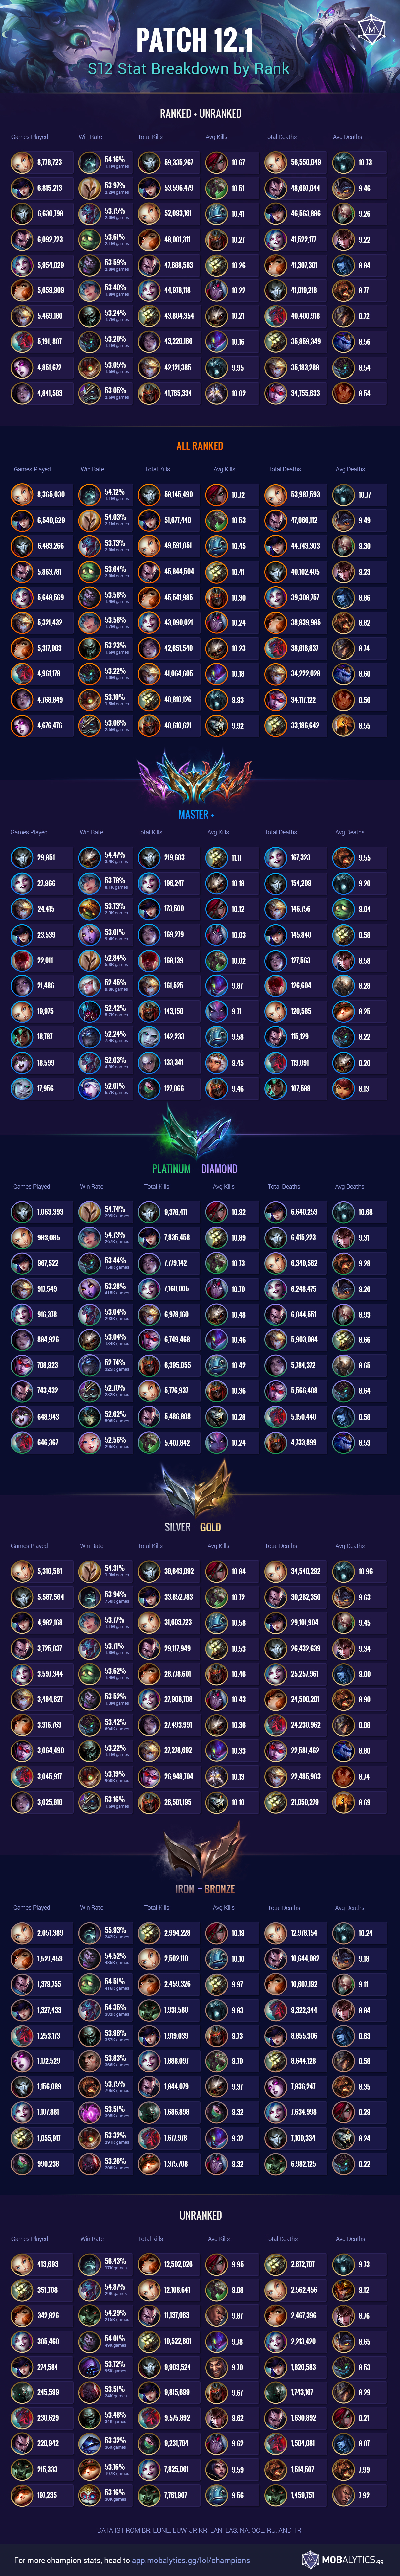 Patch 12.1 Rewind: Top 10 Champ Stats by Rank (Kills, Win Rate